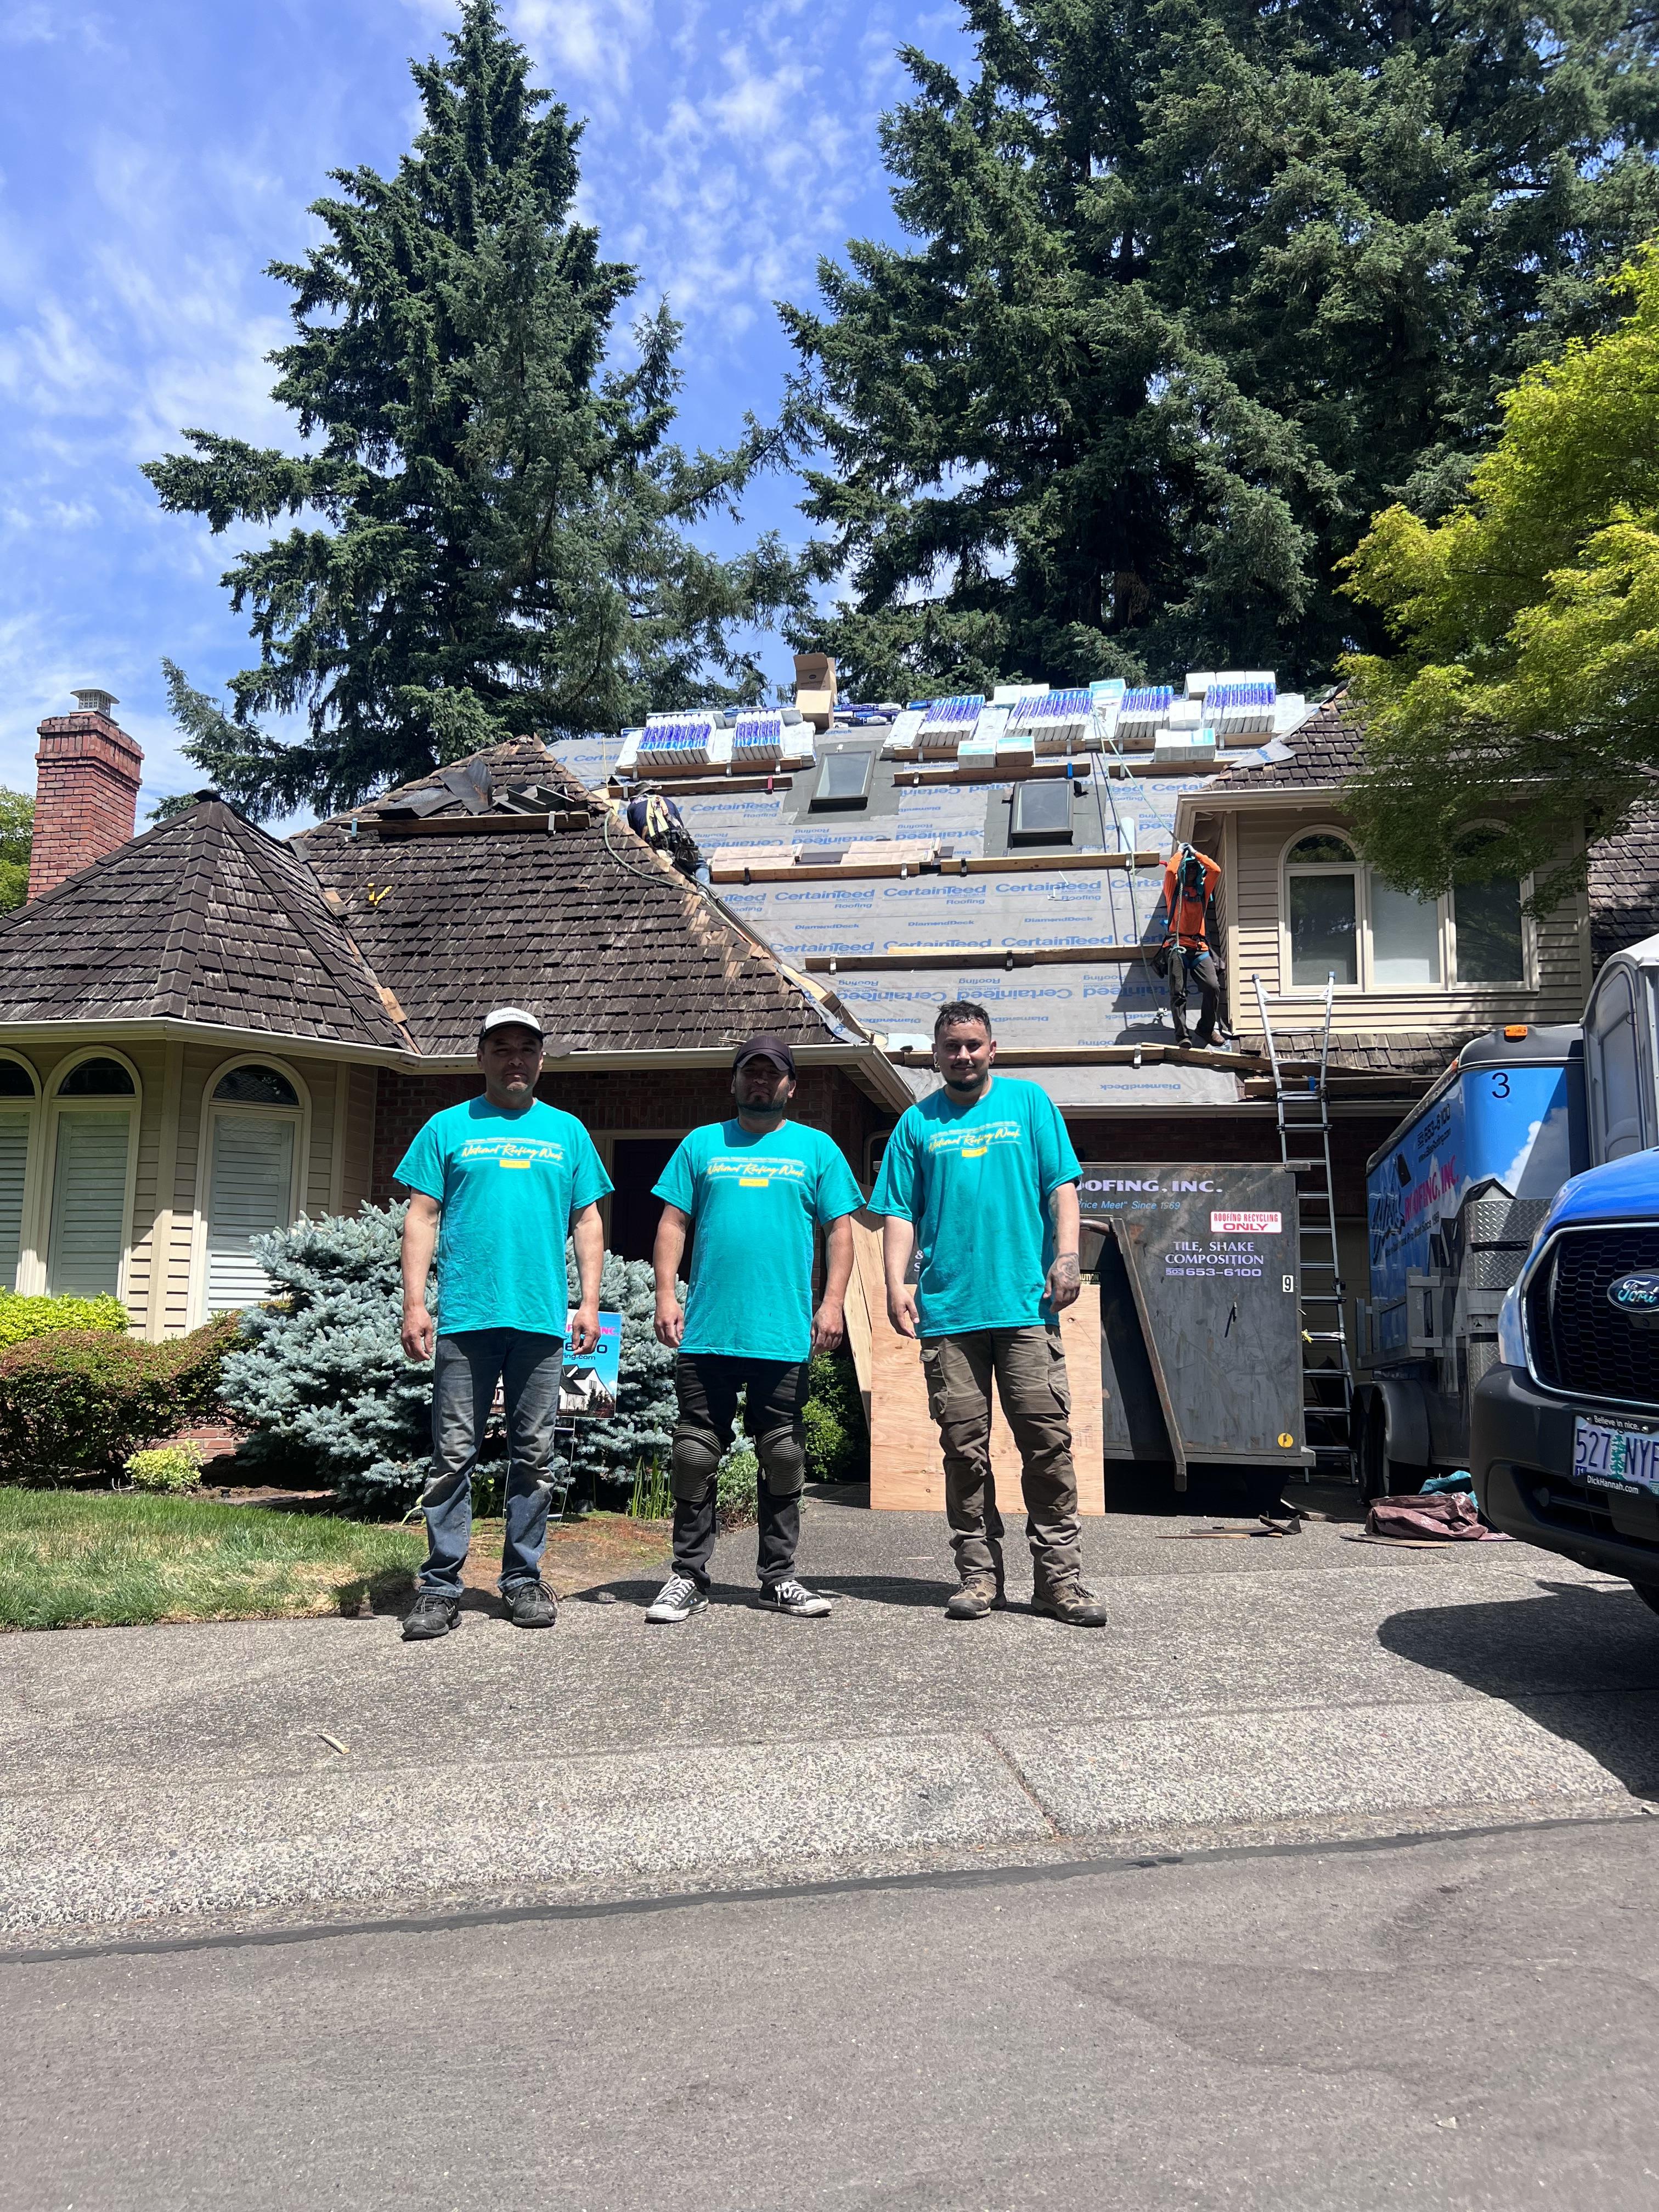 Bliss Roofing of Clackamas, Oregon